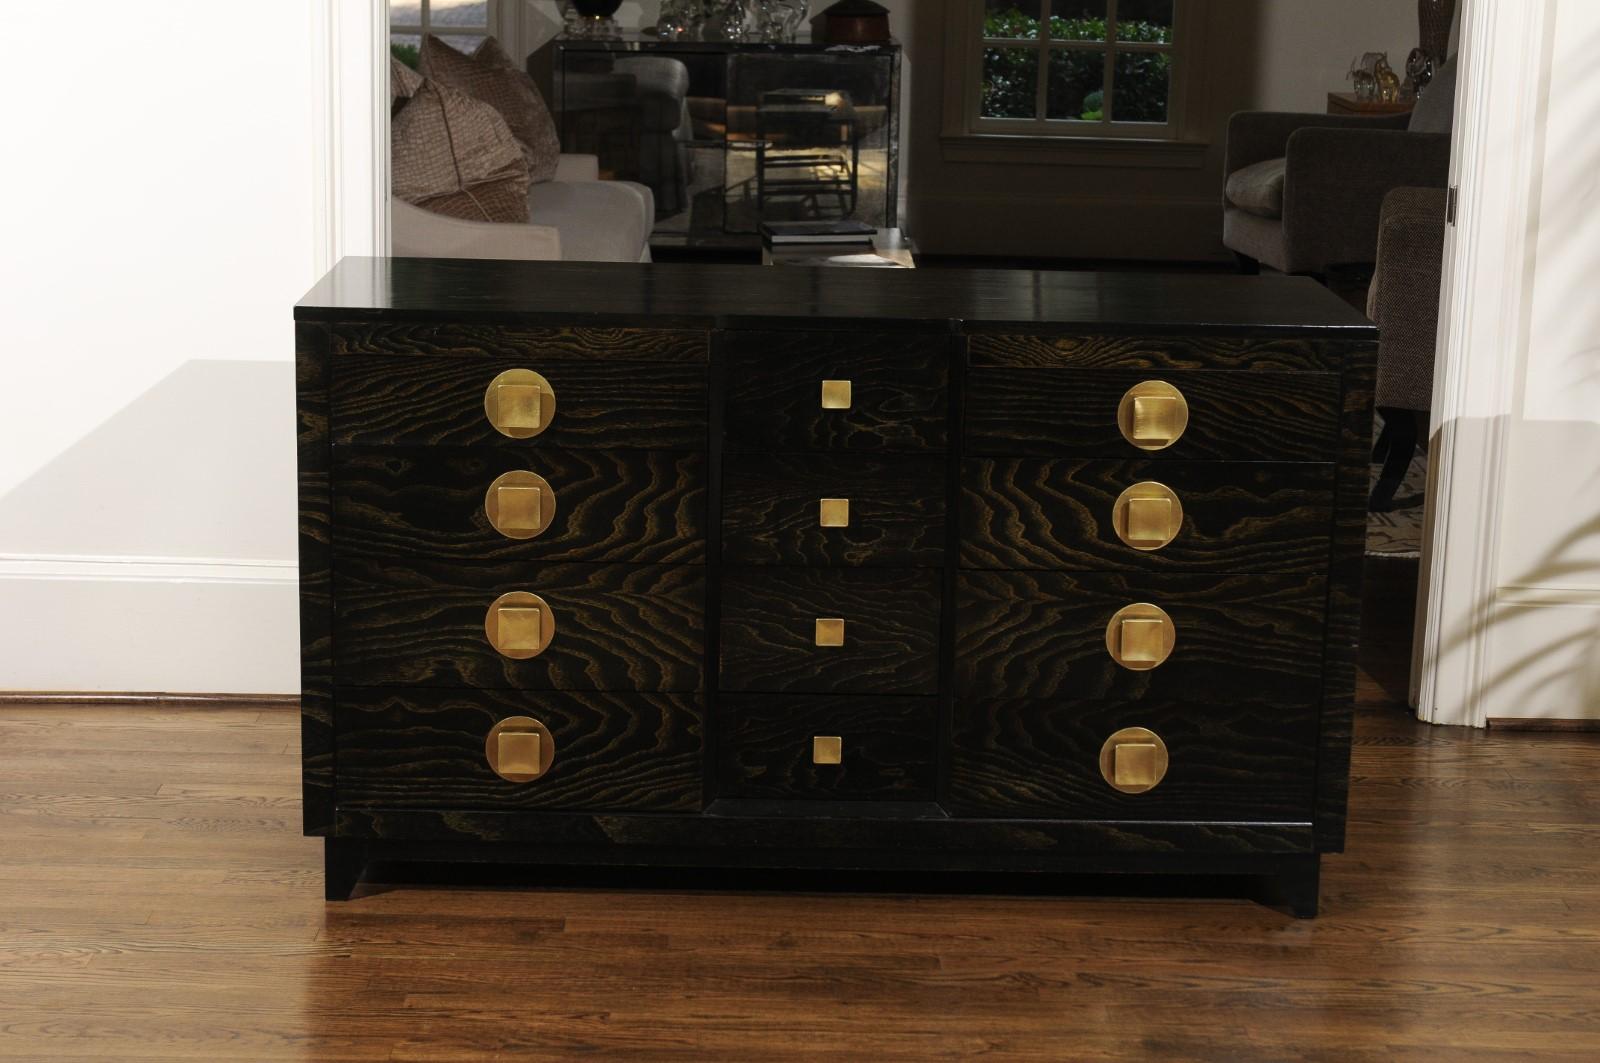 A divine 12-drawer chest by John Stuart, circa 1950. Magnificently crafted case executed in striking cerused oak with fabulous chunky solid brass hardware marking the front. This unusually breathtaking piece is both slick and organic. An incredible